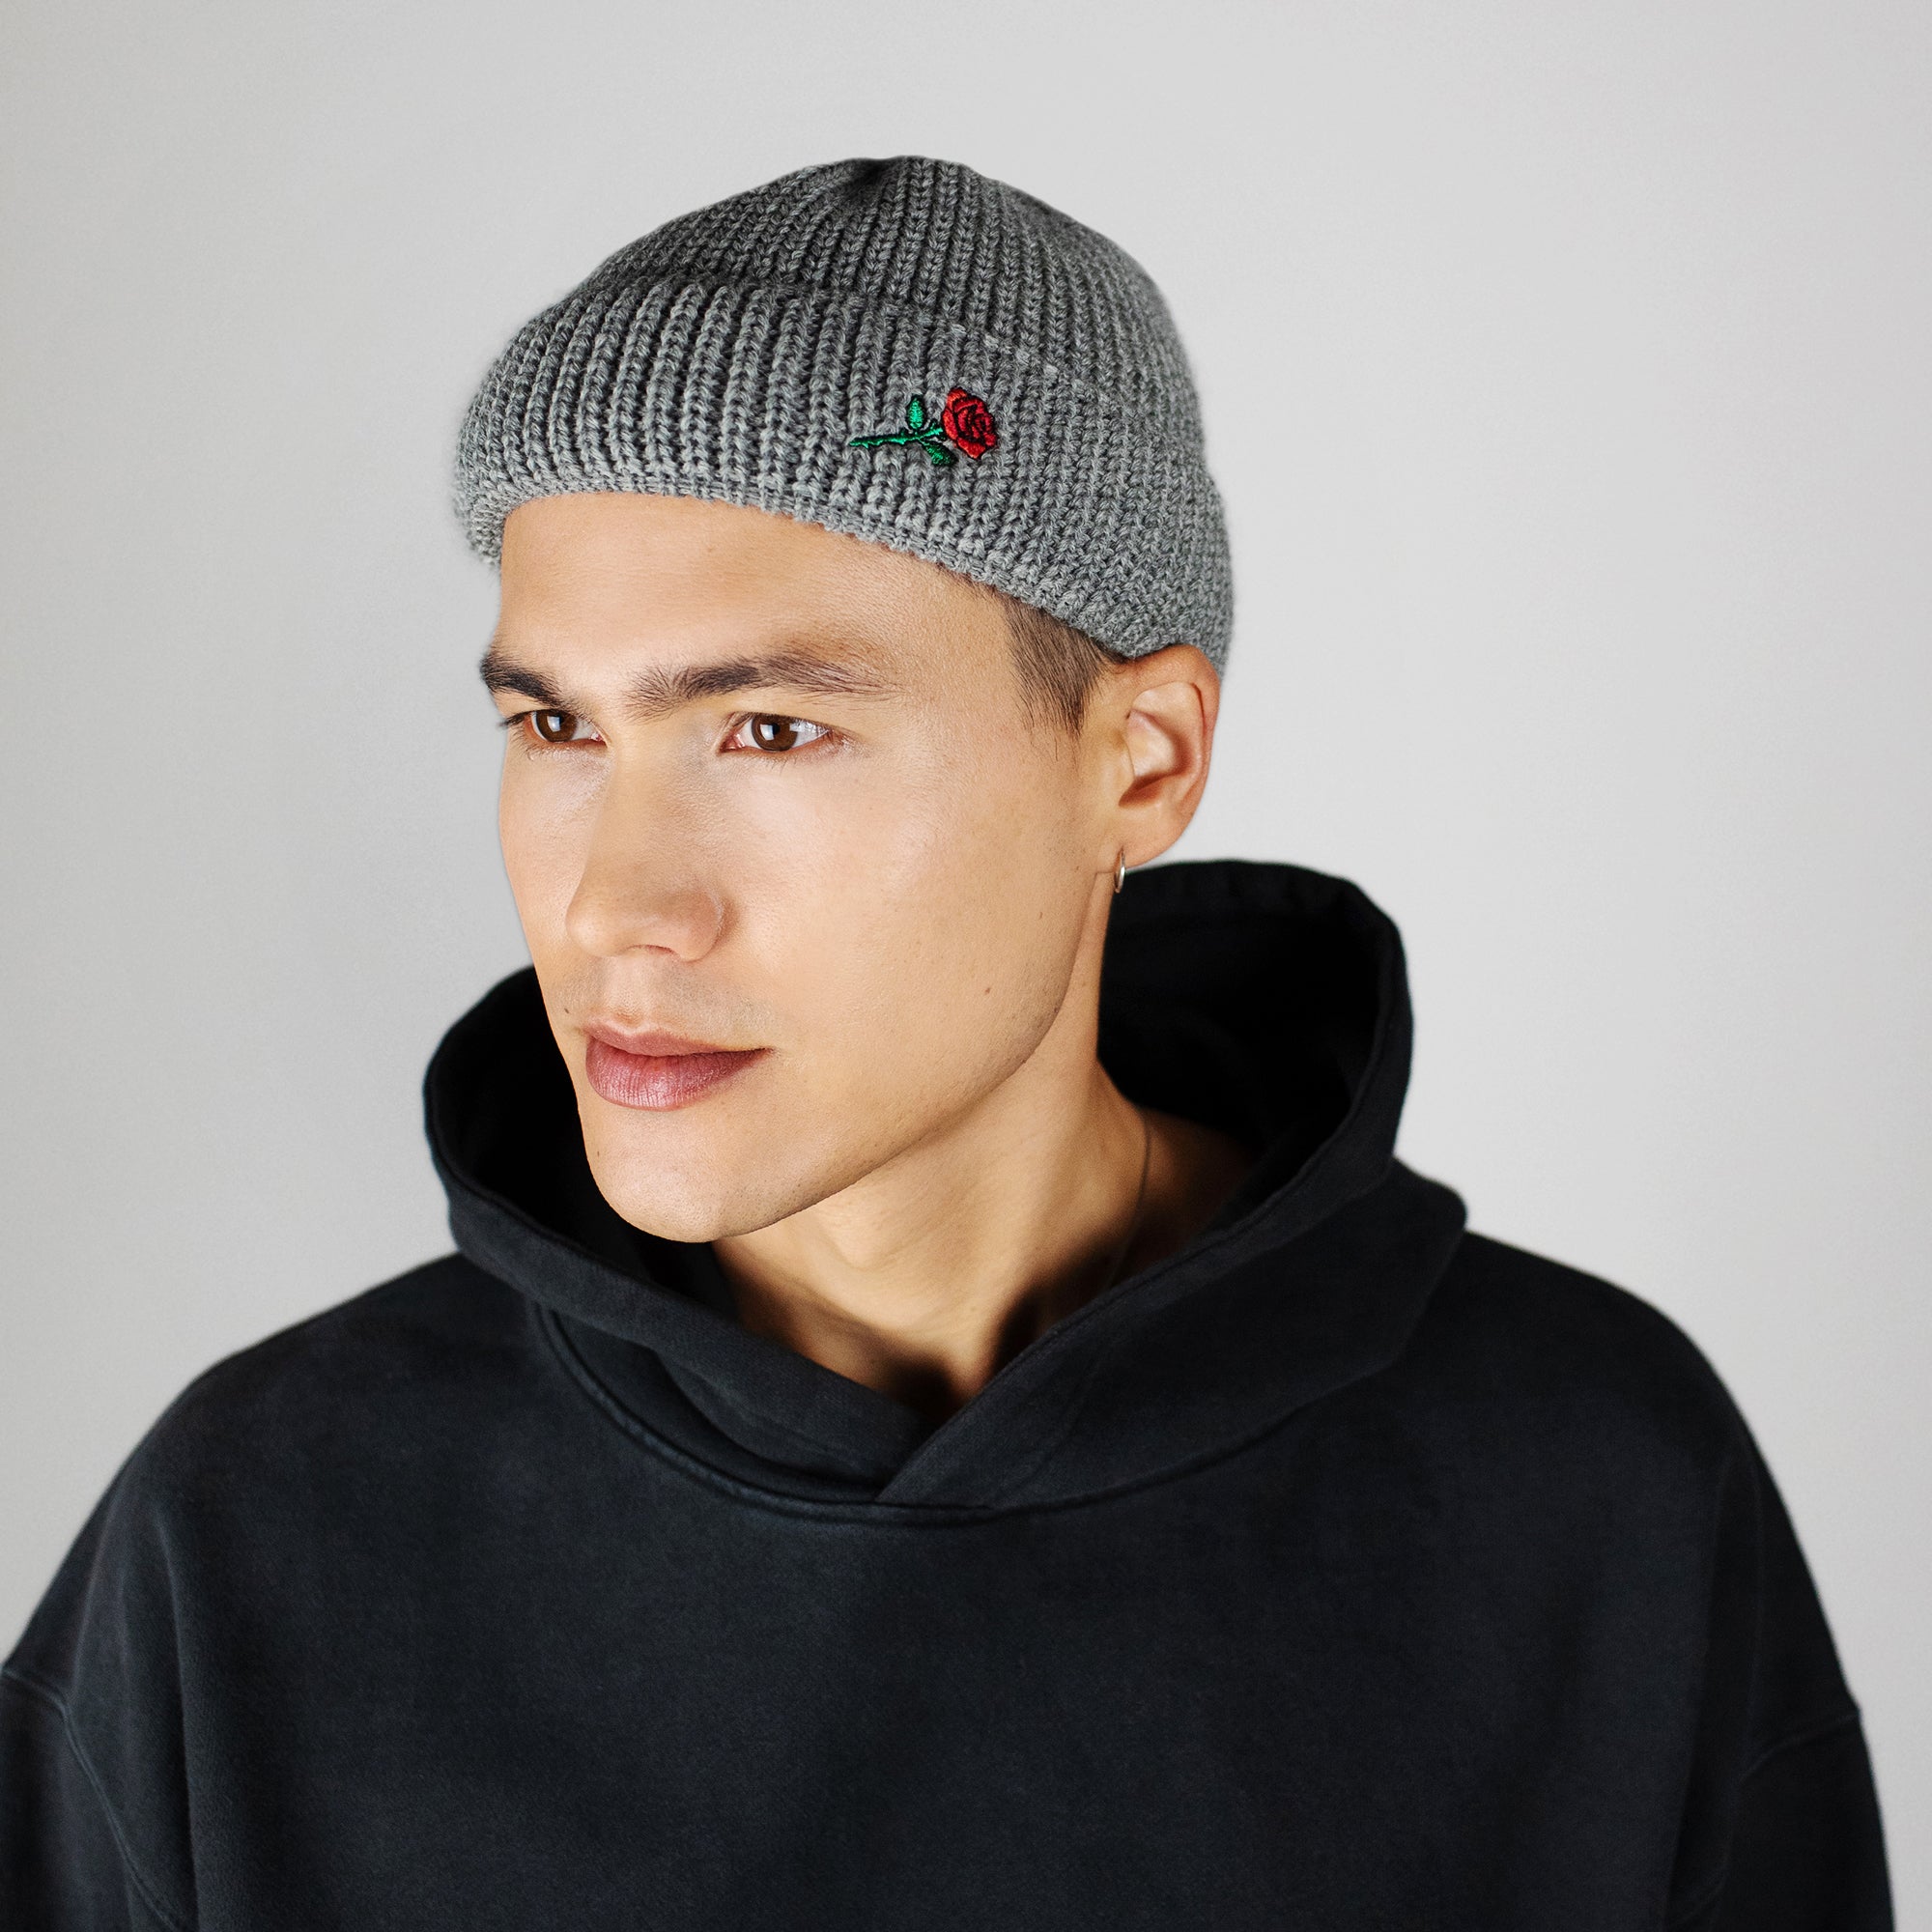 SHORT WOOL BEANIE ROSE EMBROIDERY - LIGHT-GREY